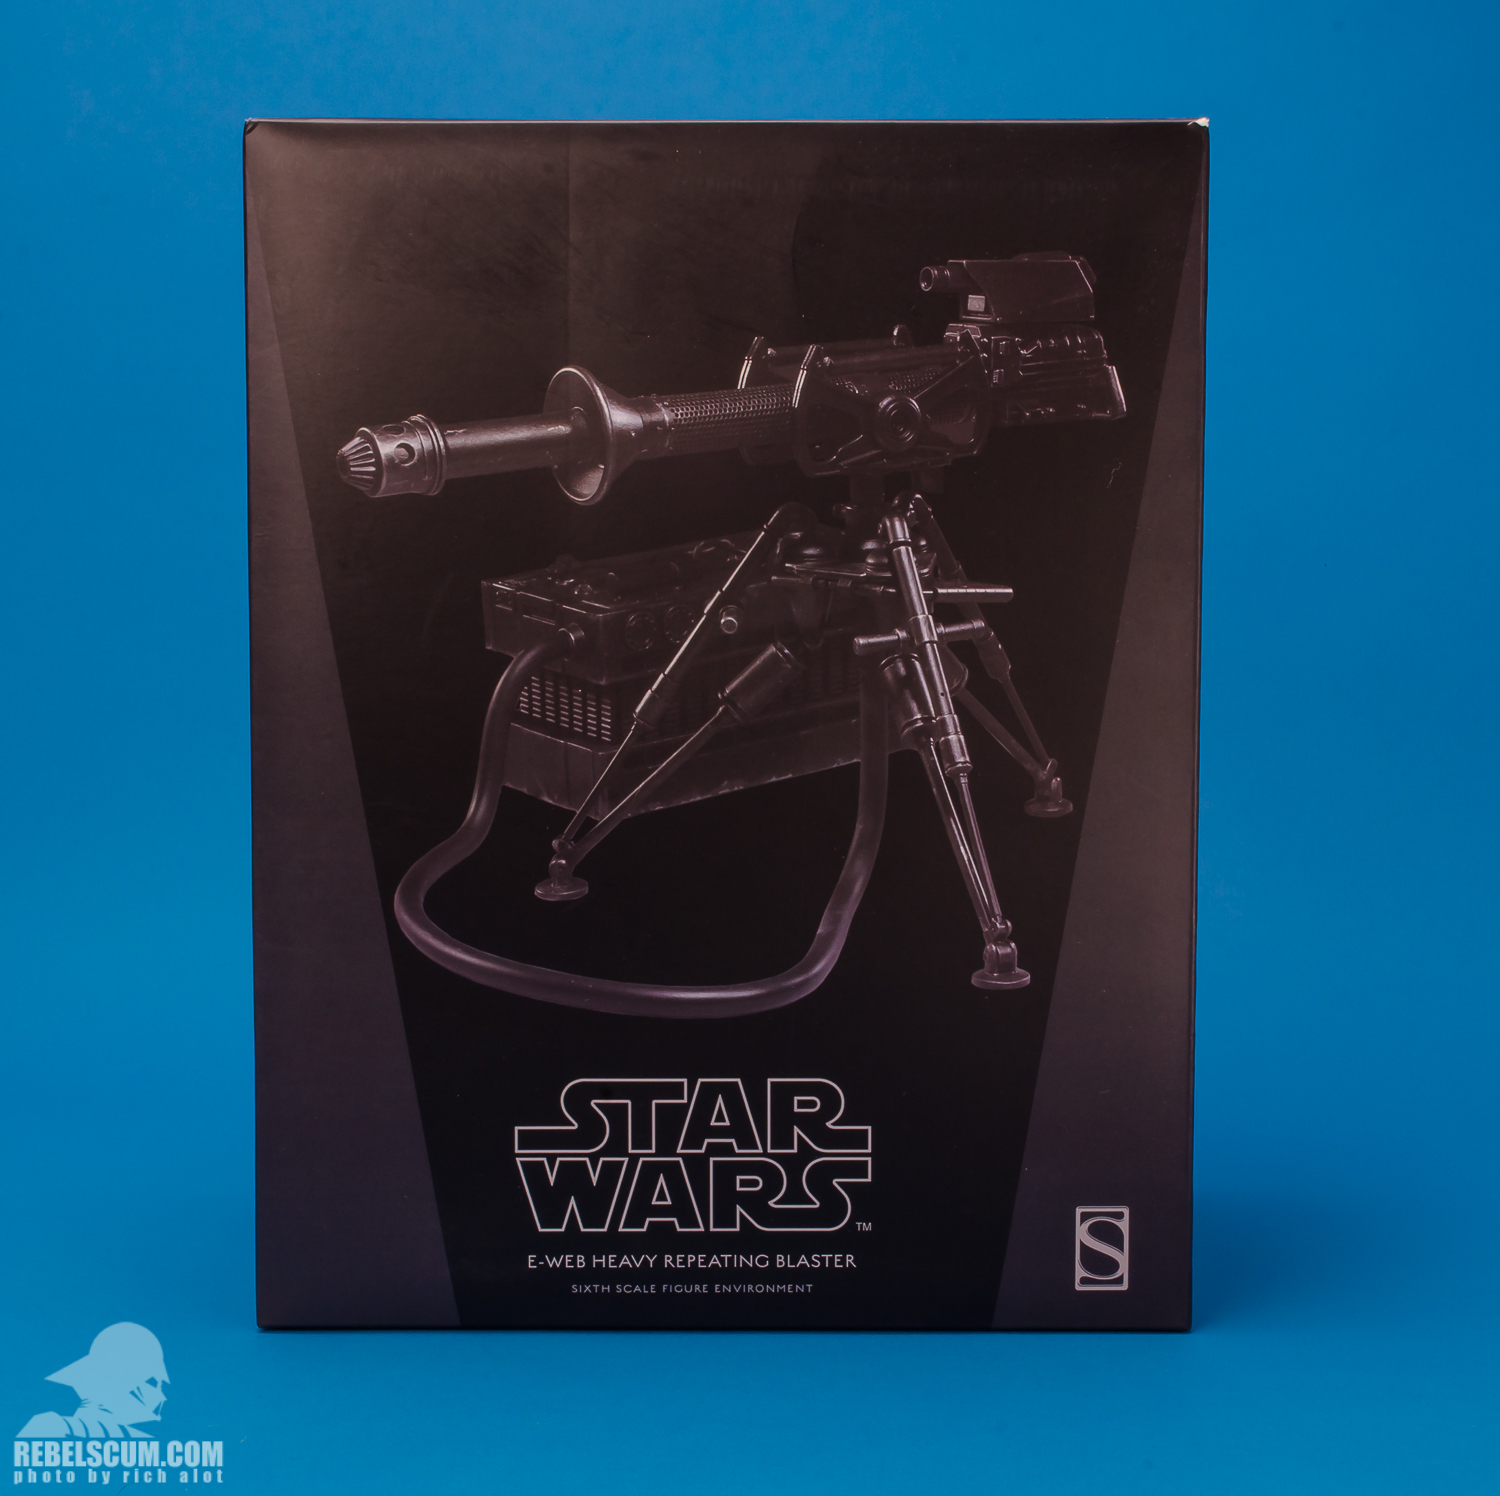 Sideshow-Collectibles-Star-Wars--Sixth-Scale-Figure-Environment-E-Web-Heavy-Repeating-Blaster-21.jpg